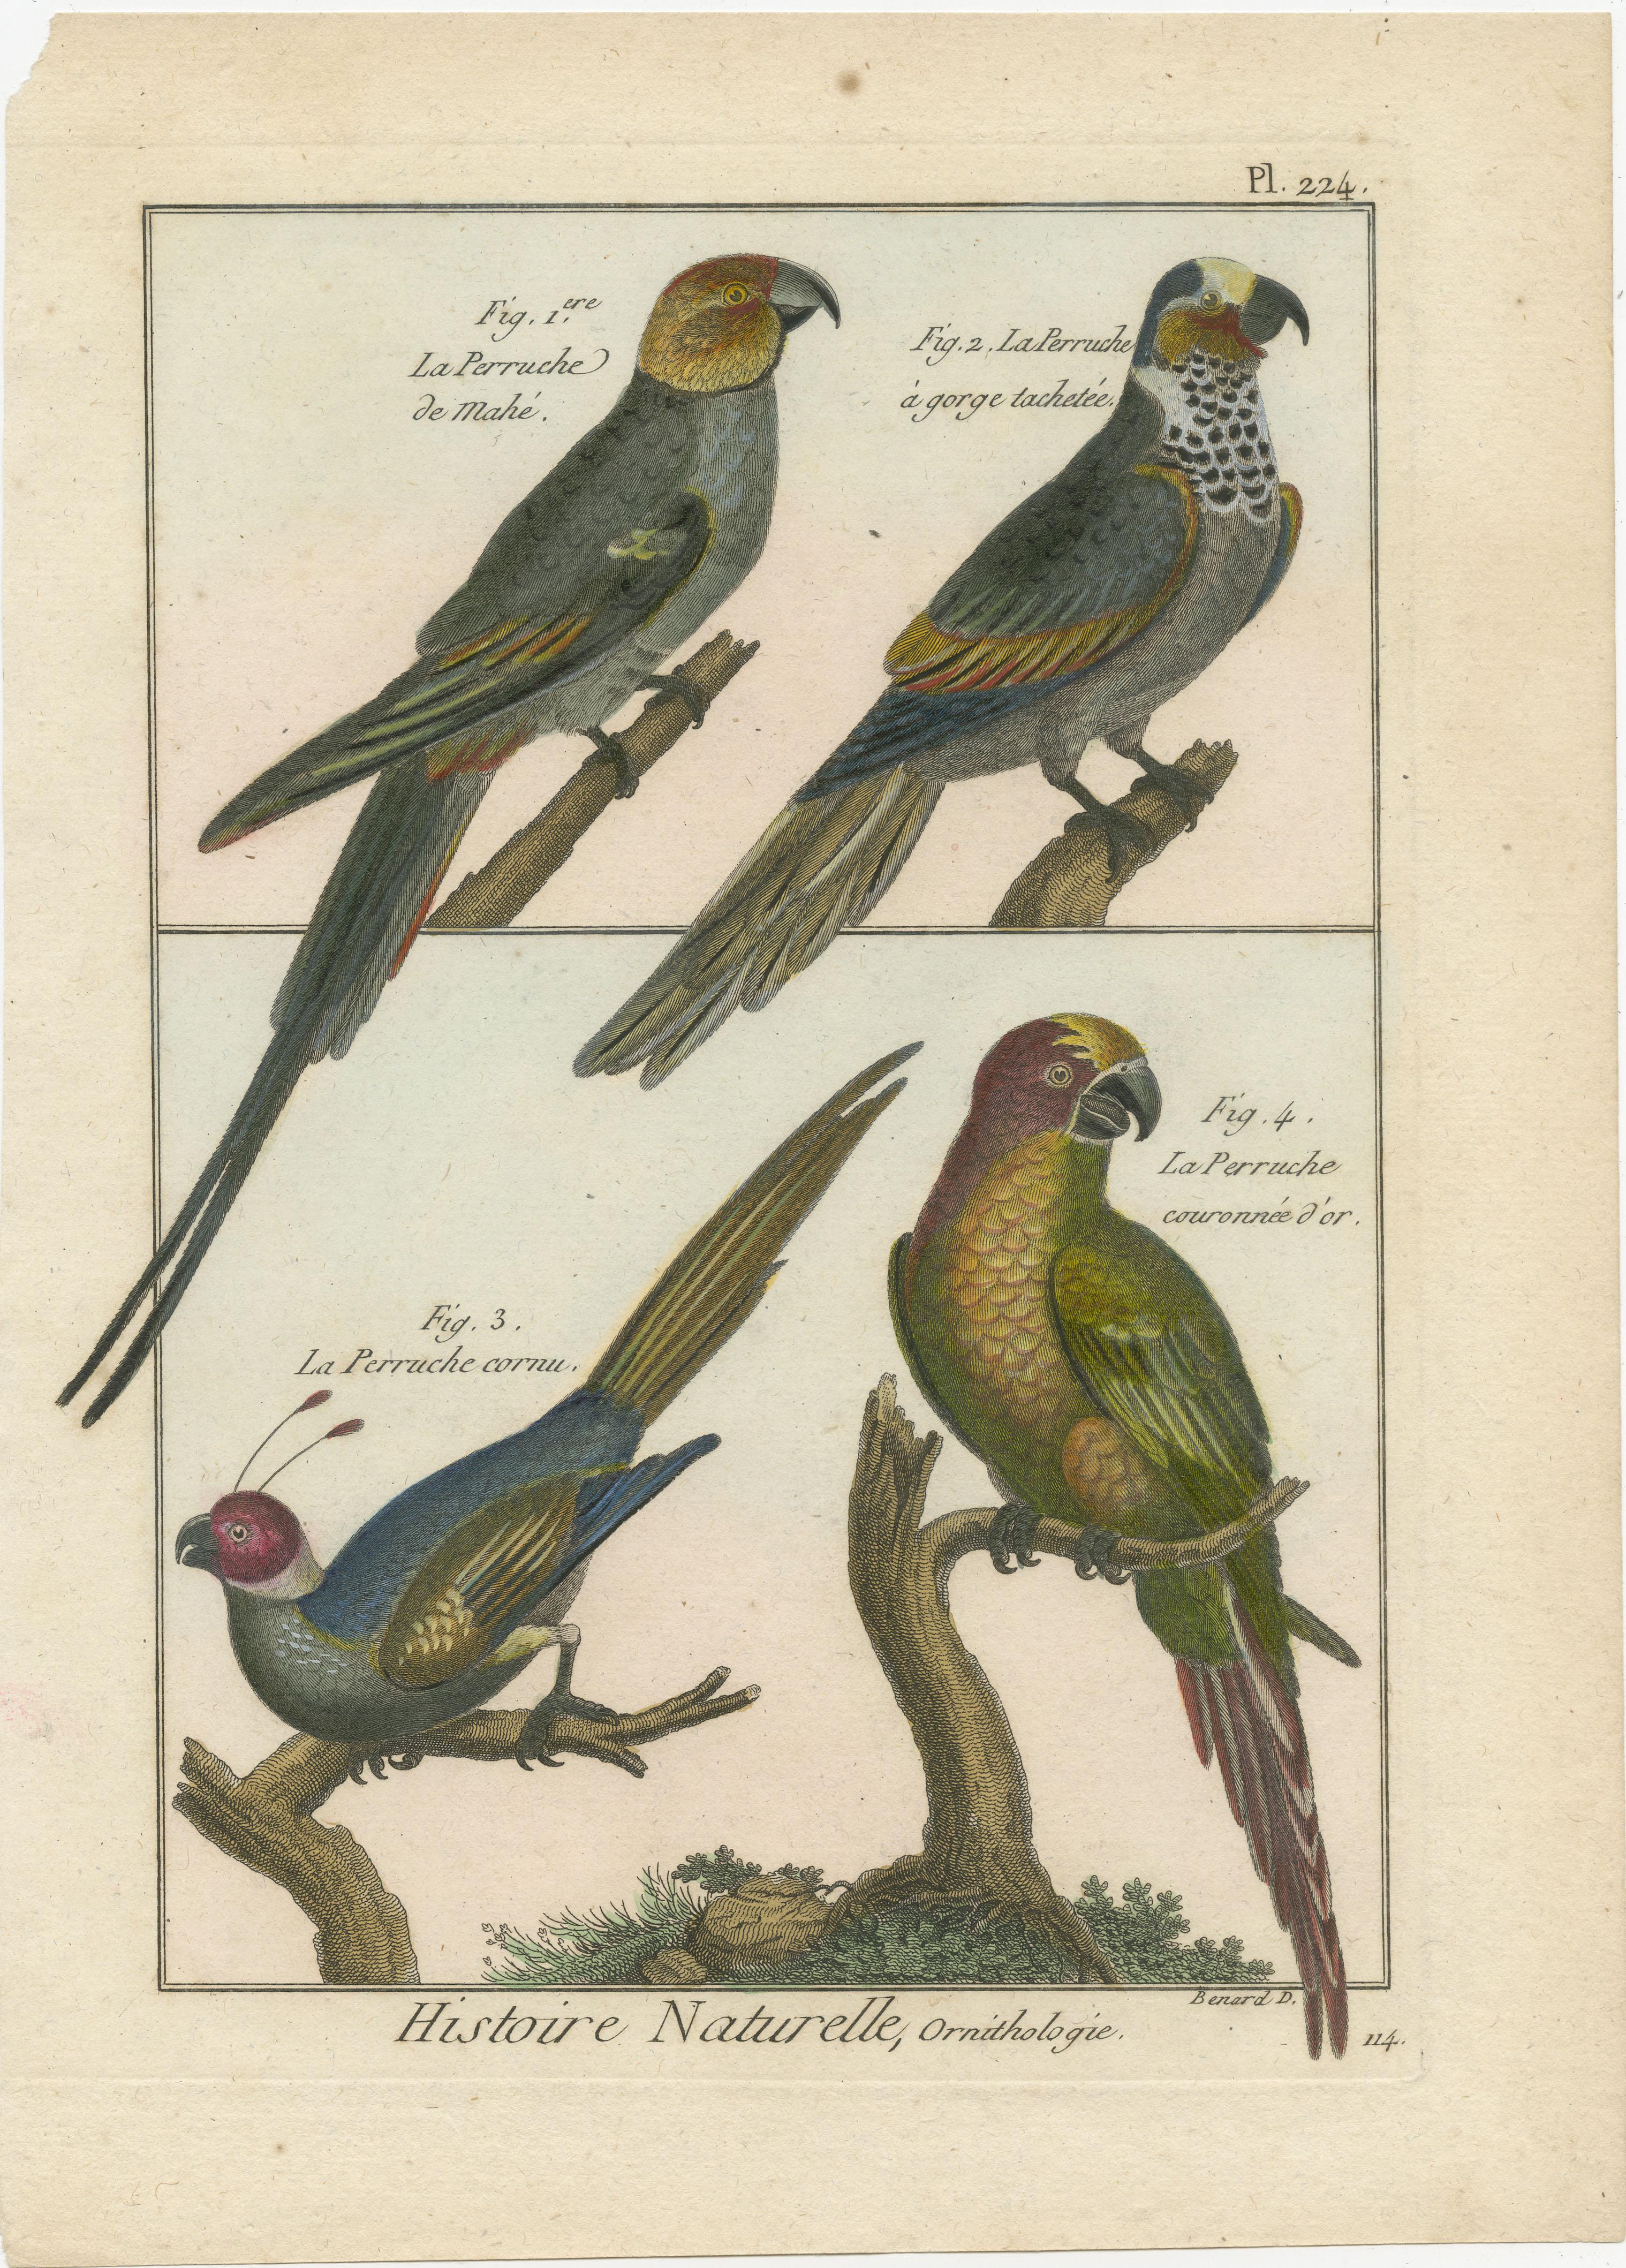 An authentic, perfect and bright, originally hand-colored, illustration of 4 Parakeets: La Perruche de Mahe, La Perruche a gorge Tachetee, La Perruche Cornu and La Perruche couronnee d'Or. 

Drawn on parchment paper (copper engraving). It has a fine